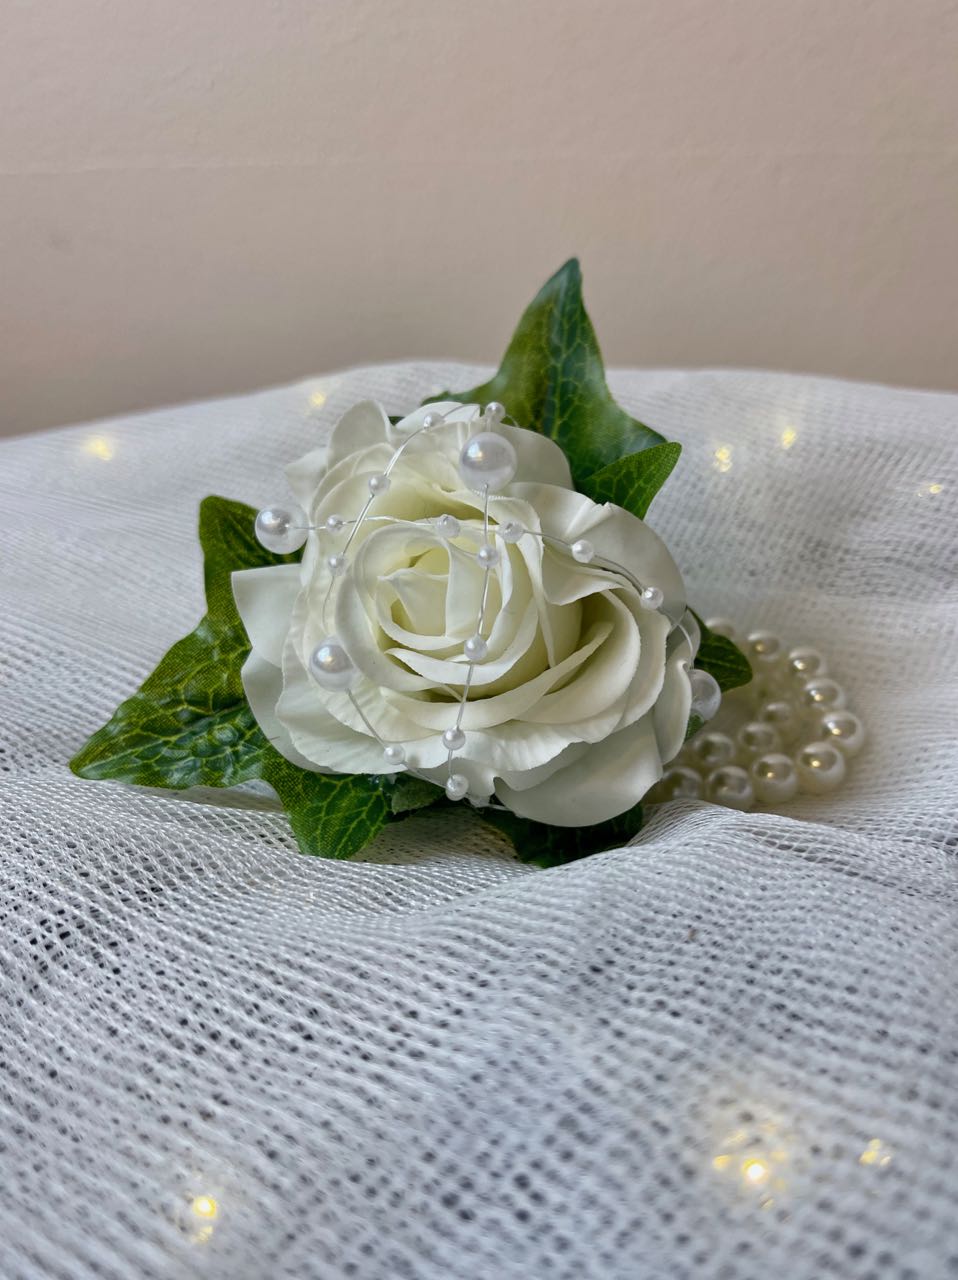 This beautiful wrist corsage features a single white rose nestled in a bed of ivy leaves, securely fastened to a pearl bracelet. A string of various sized pearls crisscrossing the rose adds visual interest, making this an elegant and sophisticated accessory for any special occasion